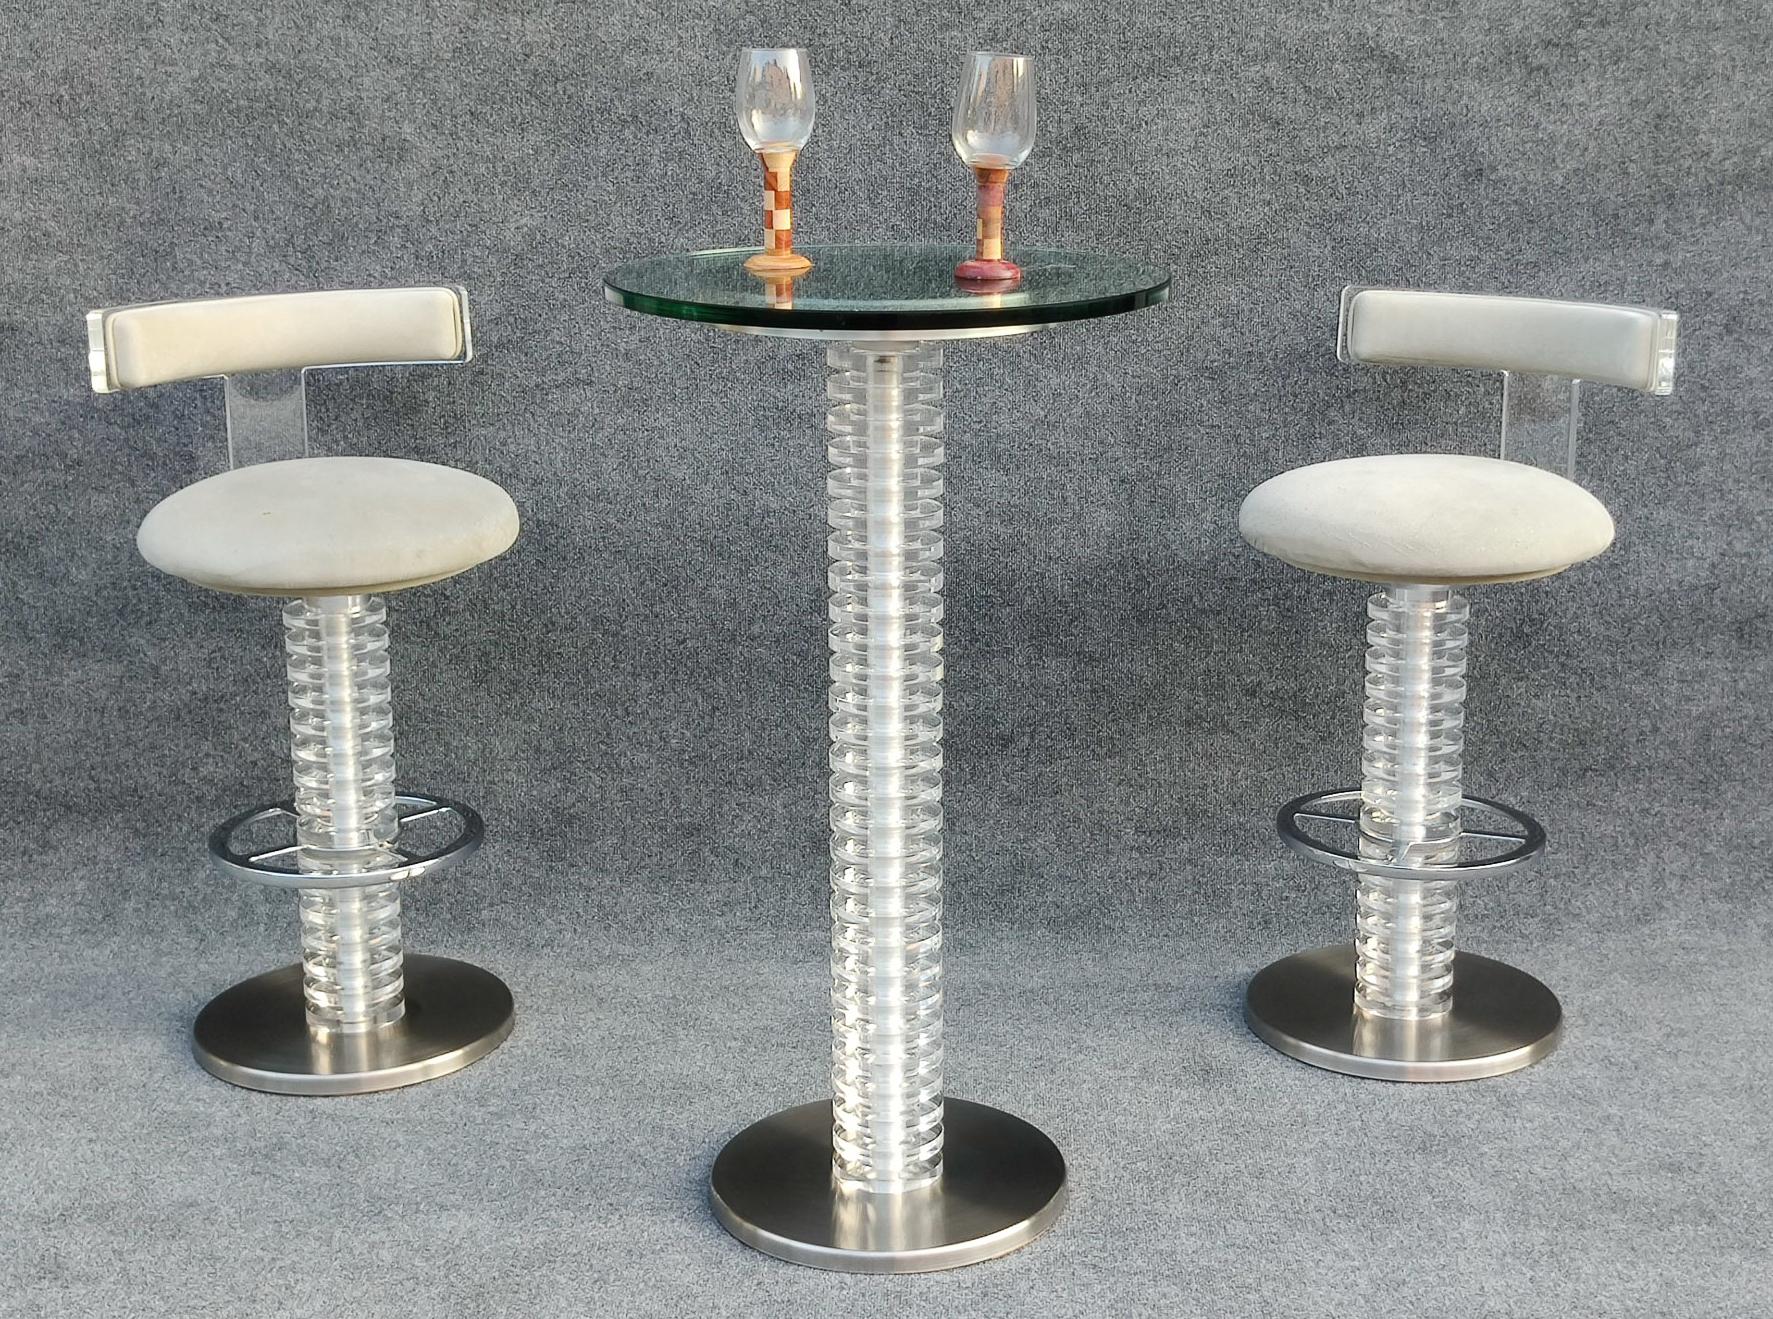 This rare and fantastic bar suite was in the 1980s by Design for Leisure. The now defunct company was a high quality seating resource for the interior design trade, in the day. These stools would often be found on luxury yachts, homes, etc. in the